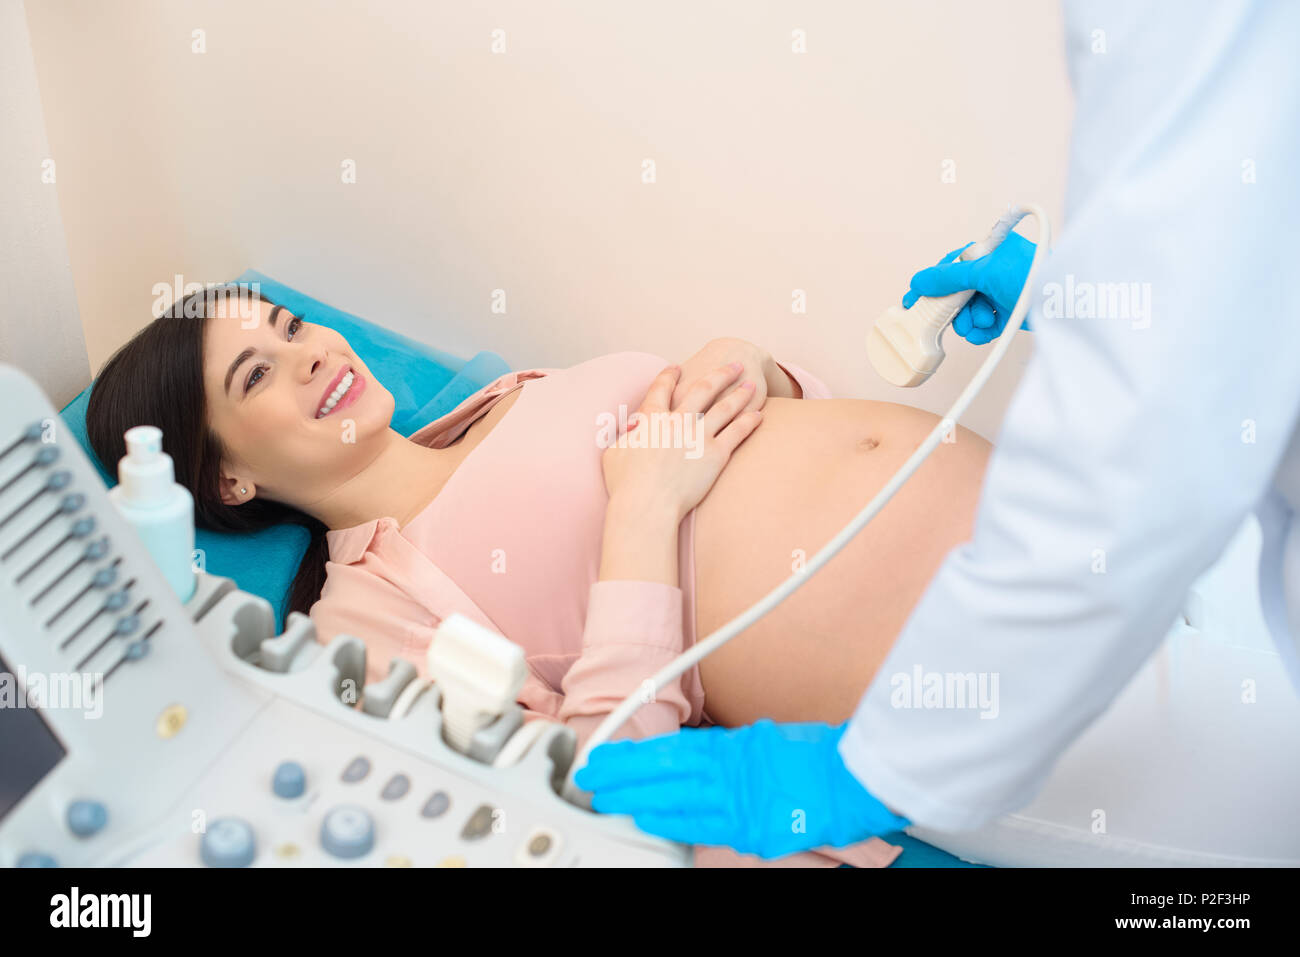 obstetrician gynecologist making ultrasound scanning for young happy pregnant woman Stock Photo